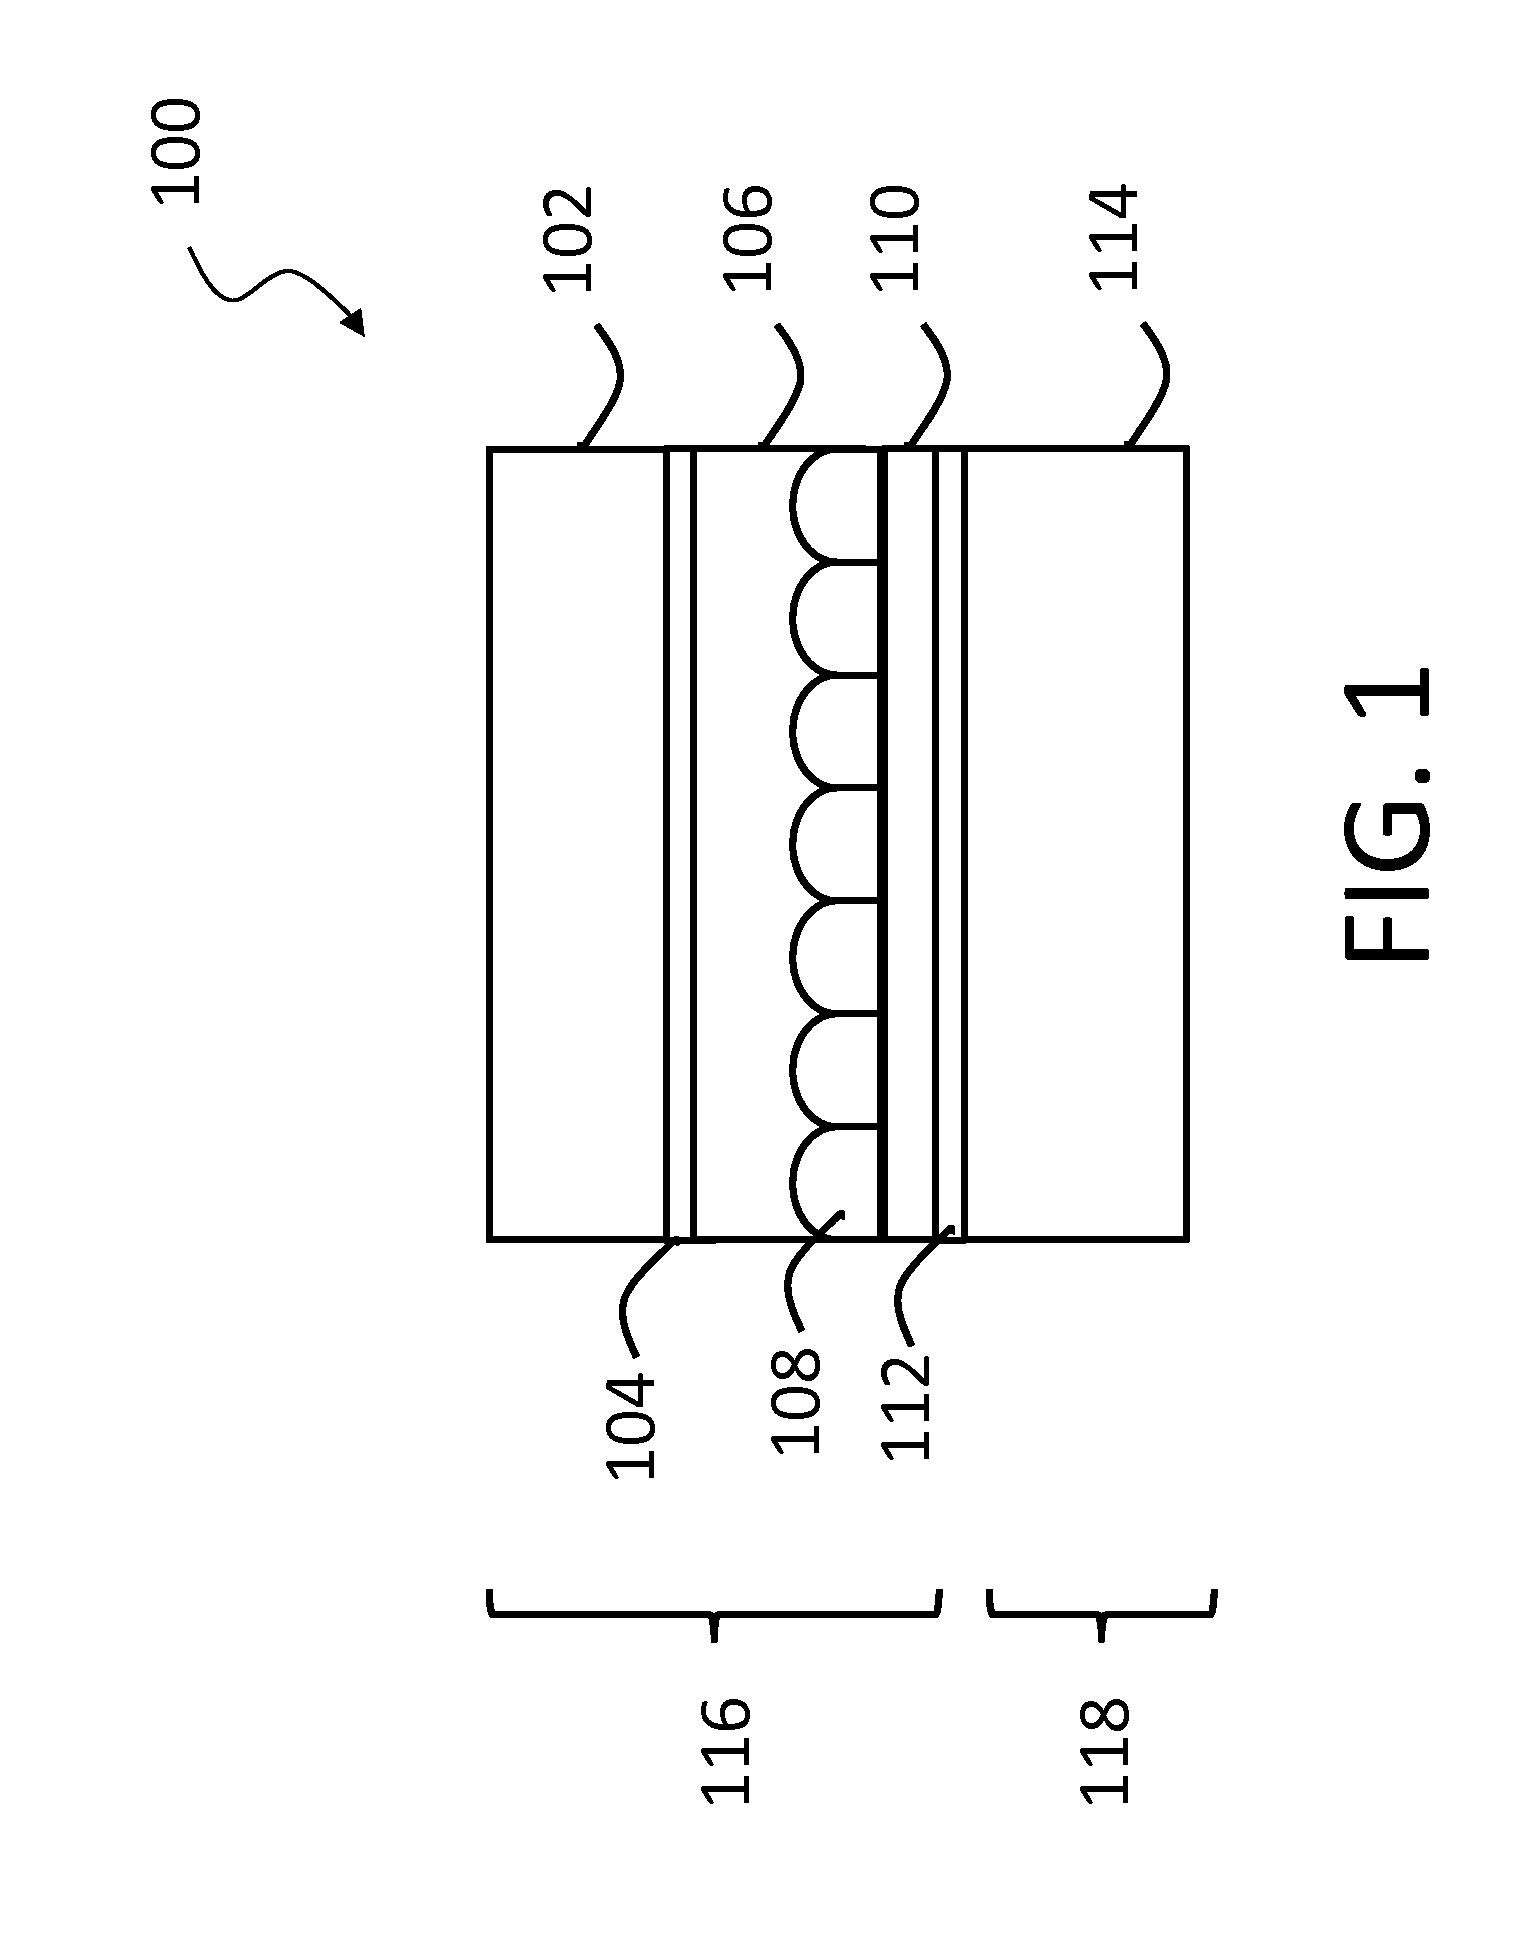 Electro-optic display with controlled electrochemical reactions